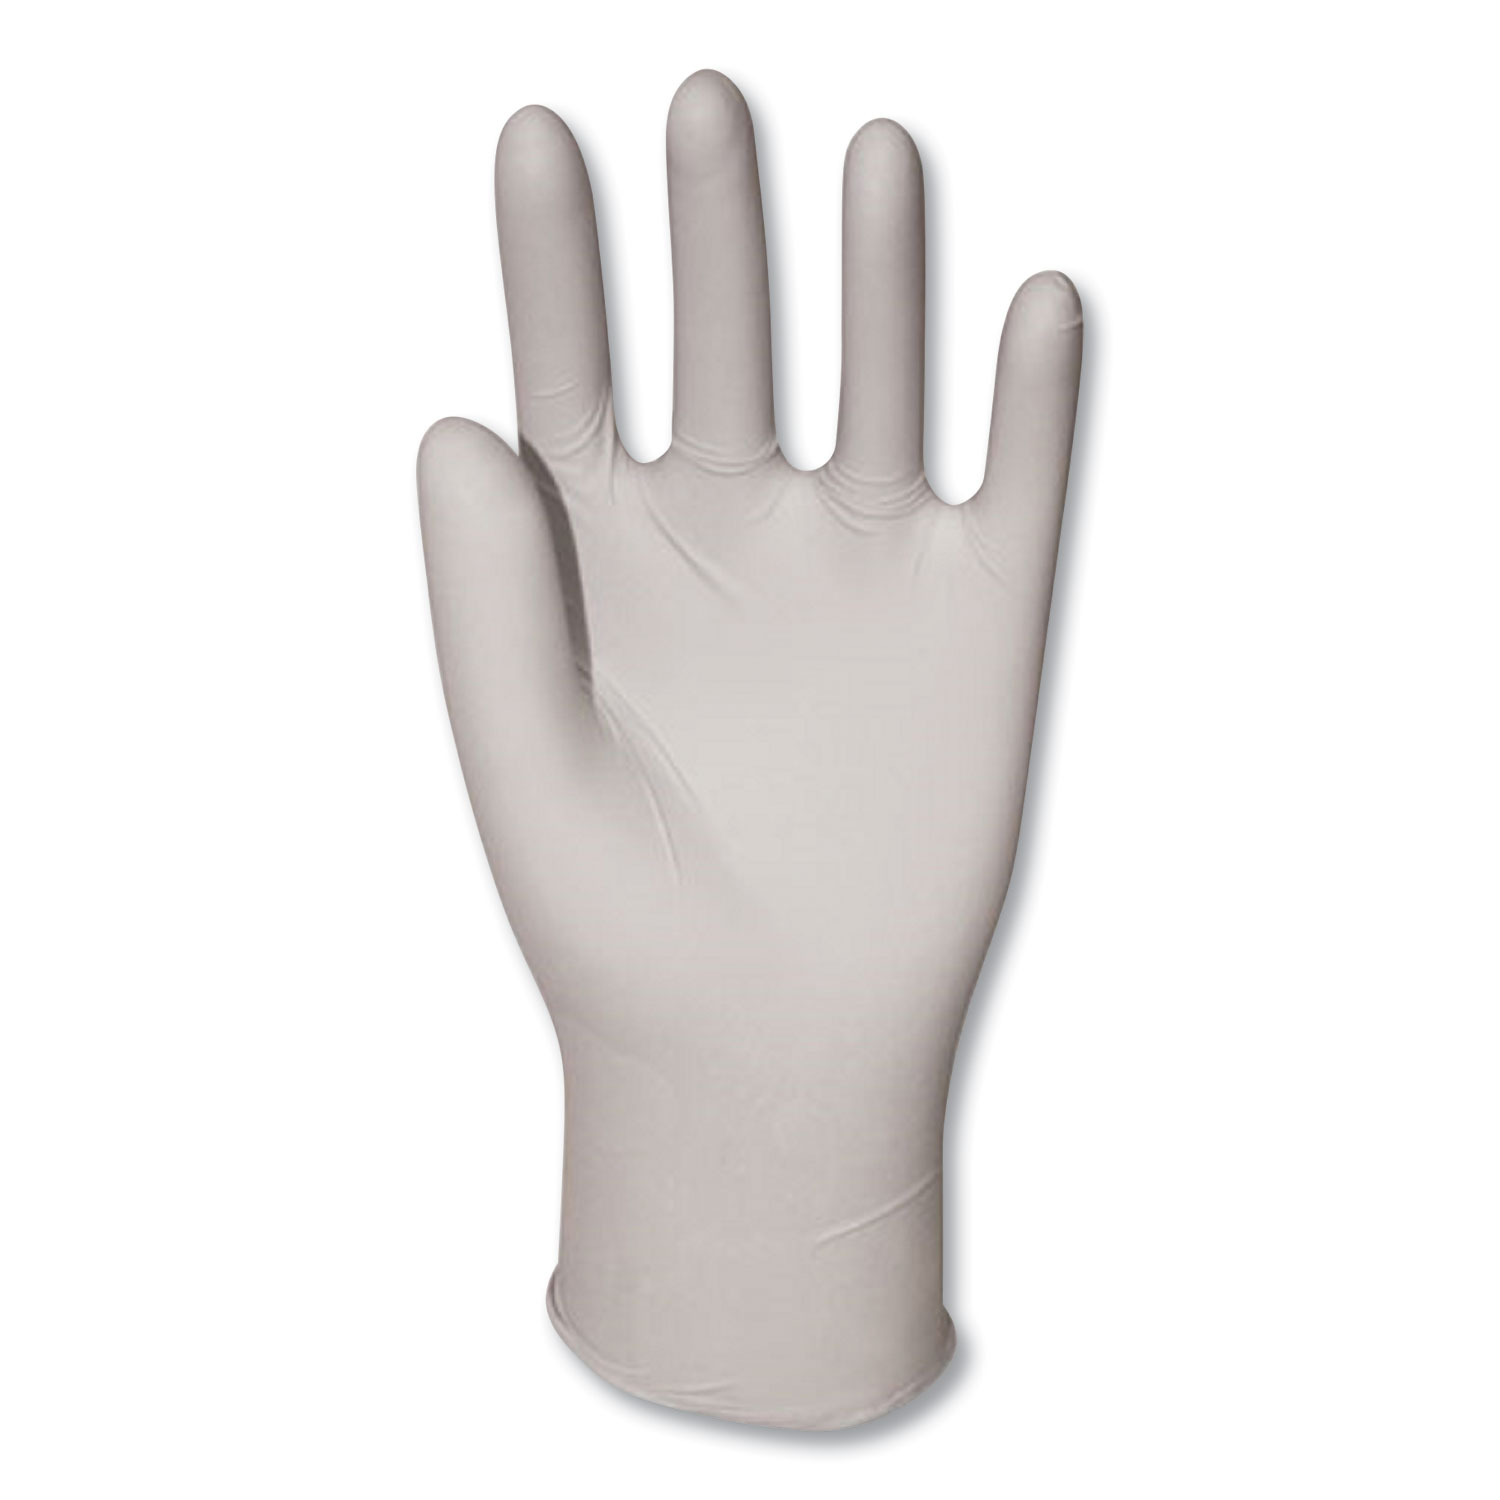  GN1 361LCT Exam Vinyl Gloves, Powder-Free, Large, Clear, 1,000/Carton (GN1361LCT) 